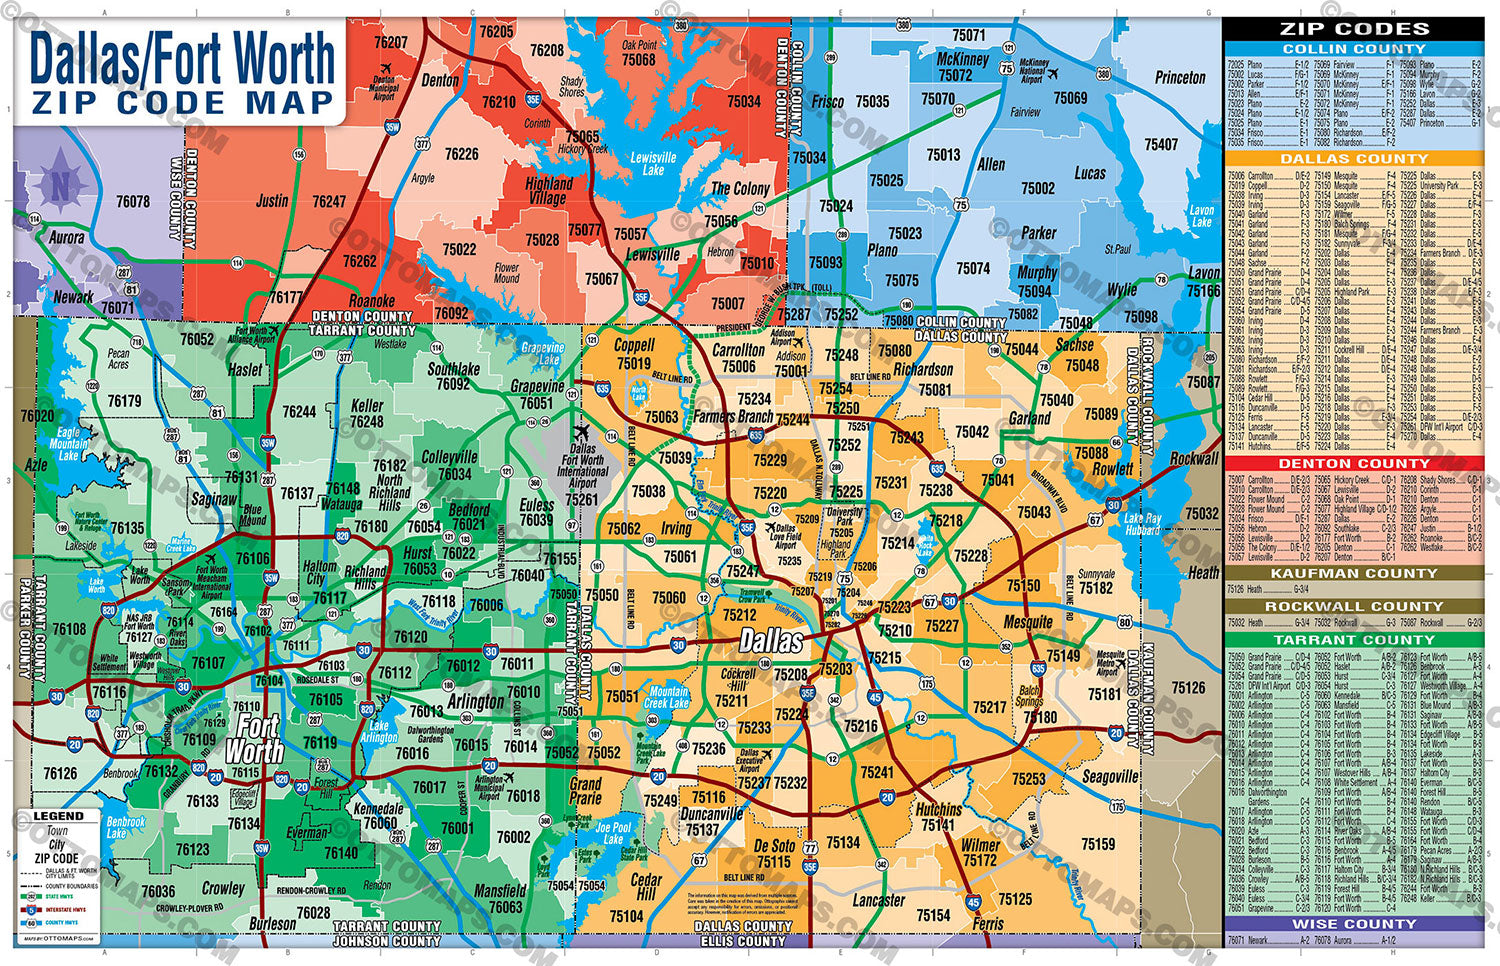 Dallas Fort Worth Zip Code Map Counties Colorized Otto Maps 6985